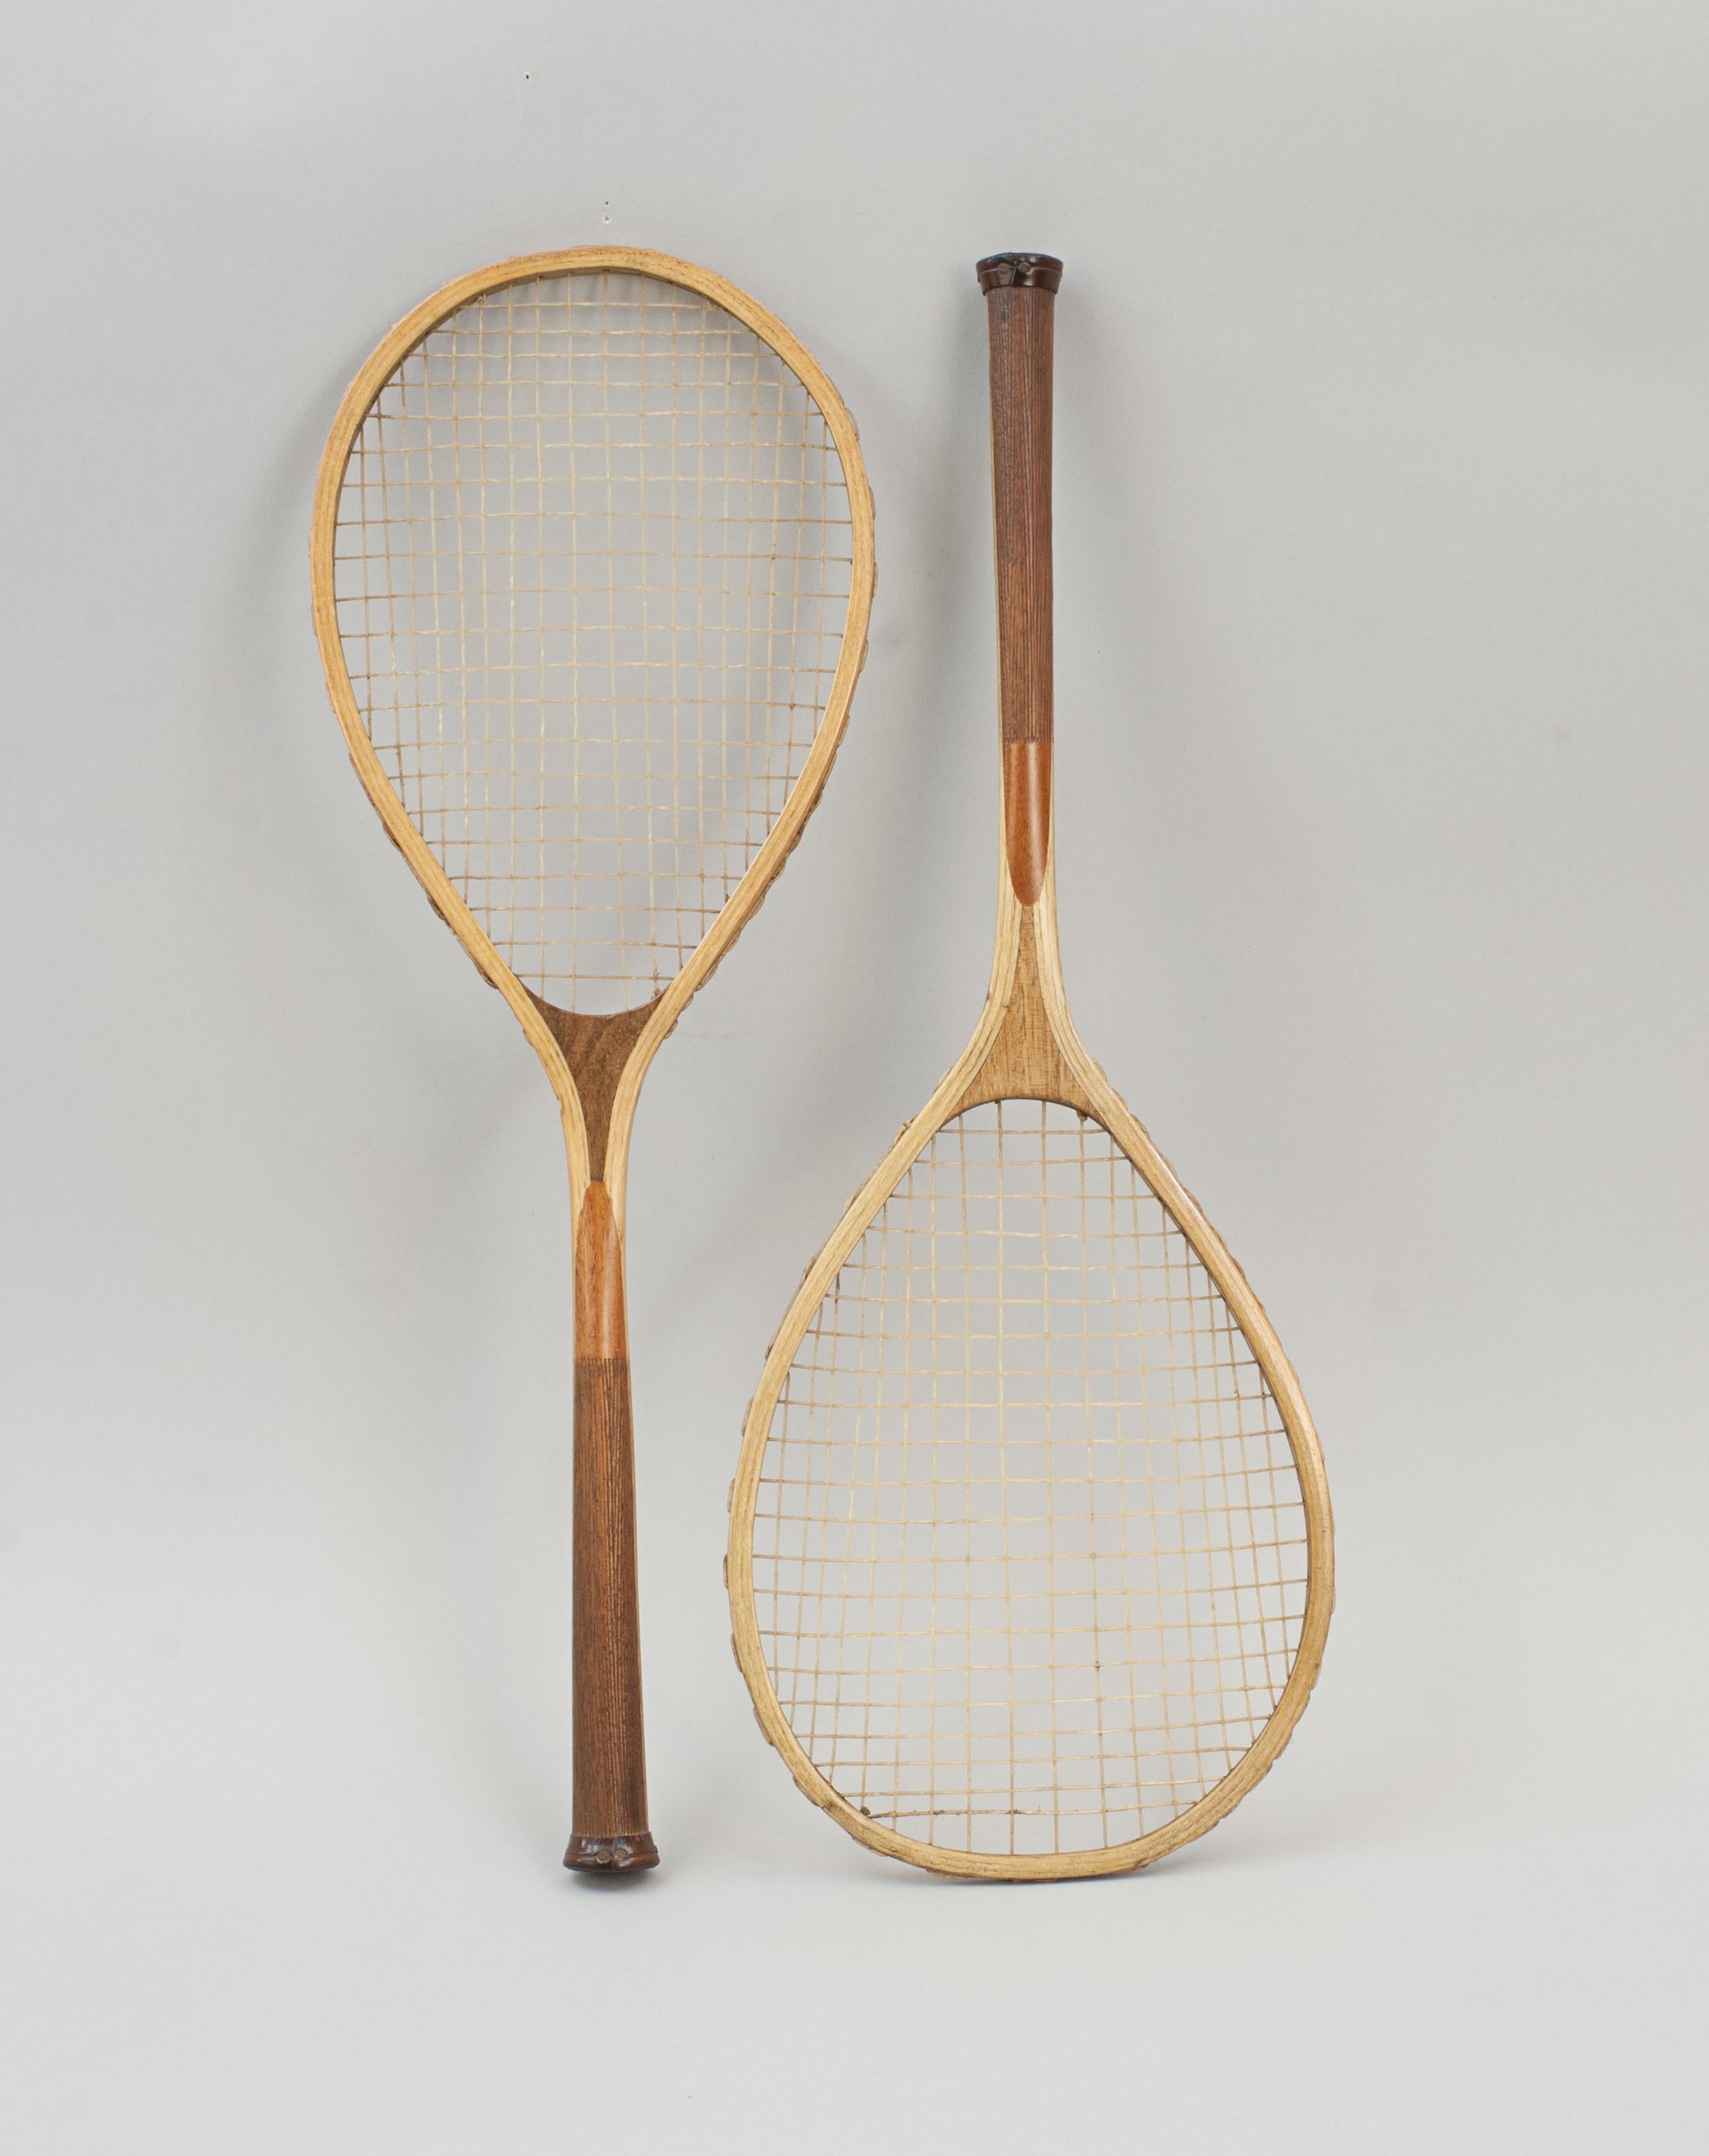 Antique Pair Of Table Tennis Rackets, Ping Pong Bats.
A rare pair of early teardrop-shaped strung 'Ping Pong' bats or rackets, unfortunately the maker is unknown. Some of the early table tennis bats were scaled down versions of lawn tennis rackets,